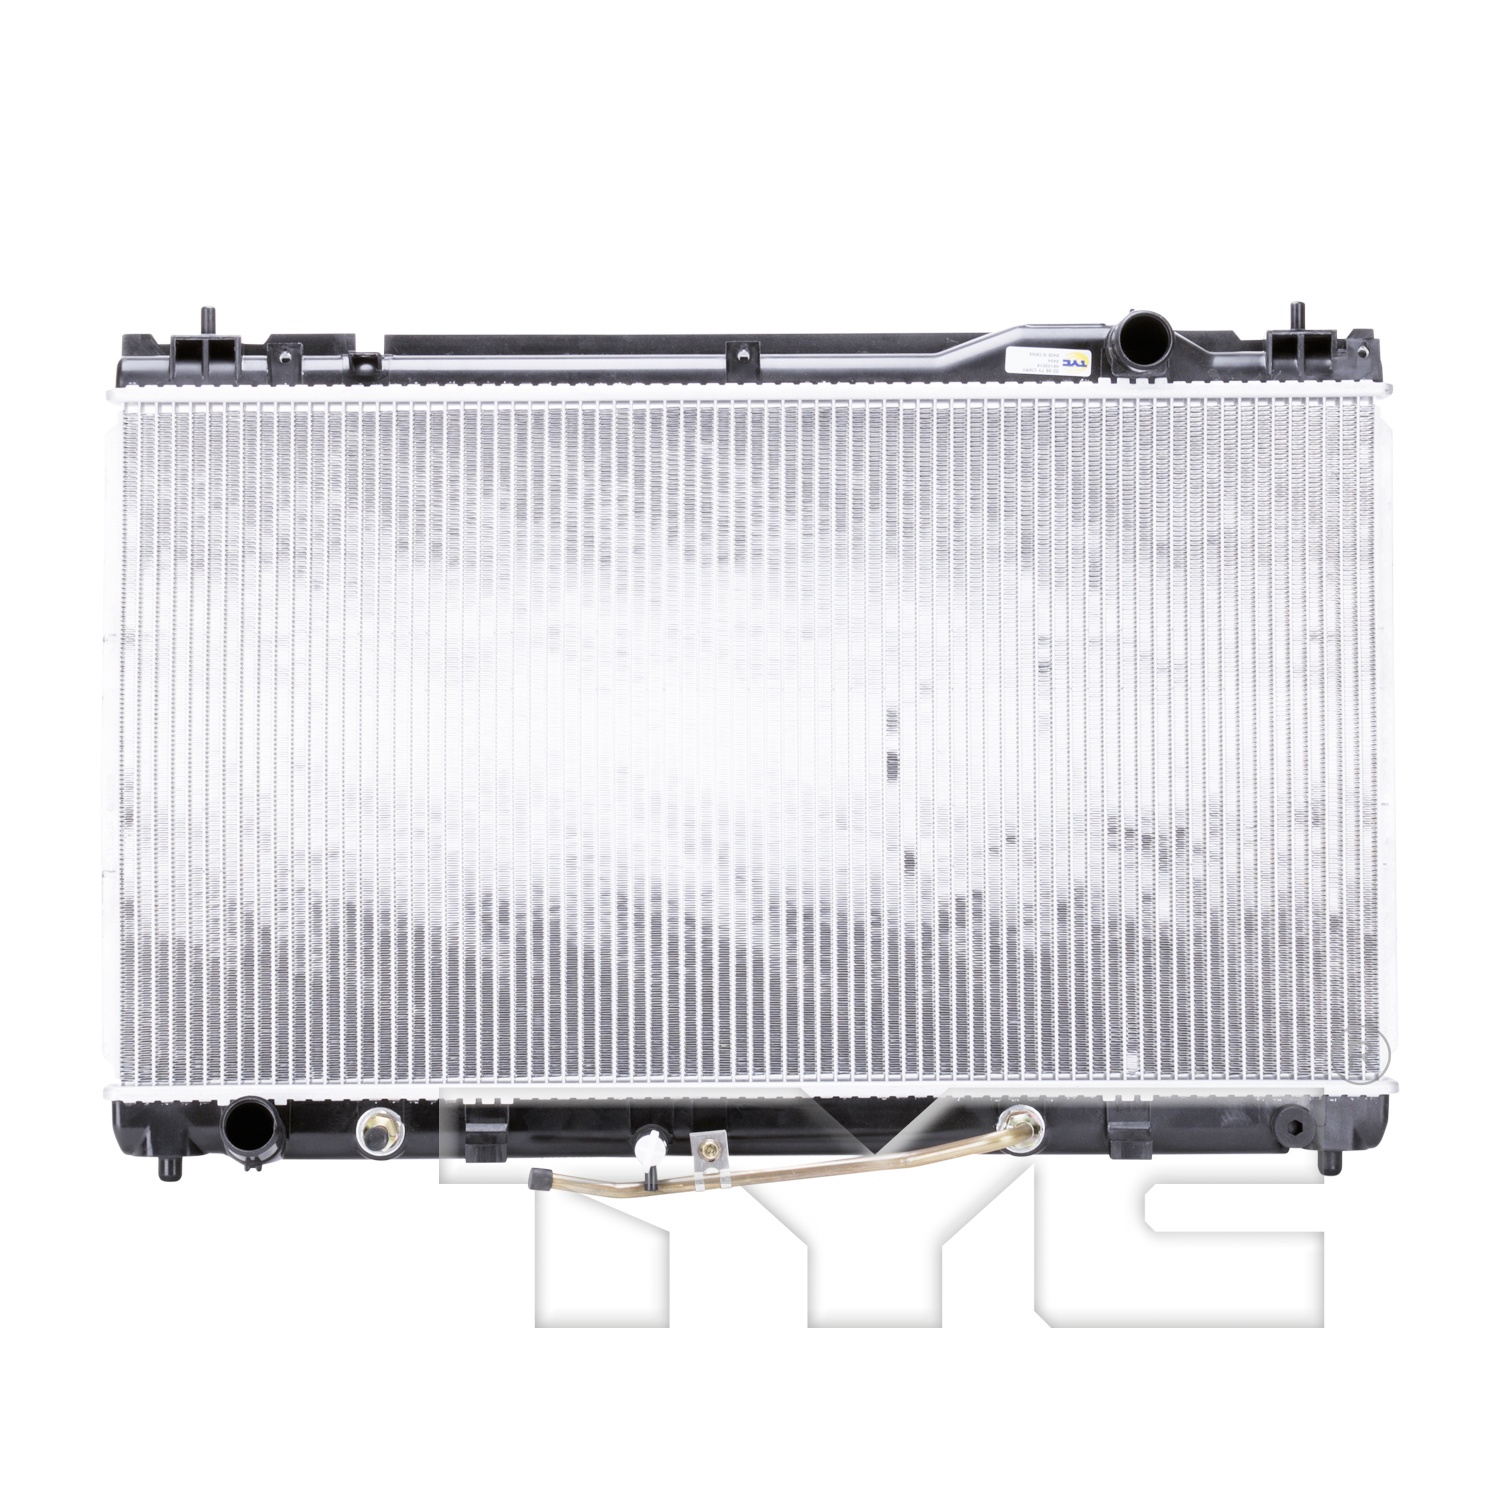 Aftermarket RADIATORS for TOYOTA - CAMRY, CAMRY,02-06,Radiator assembly